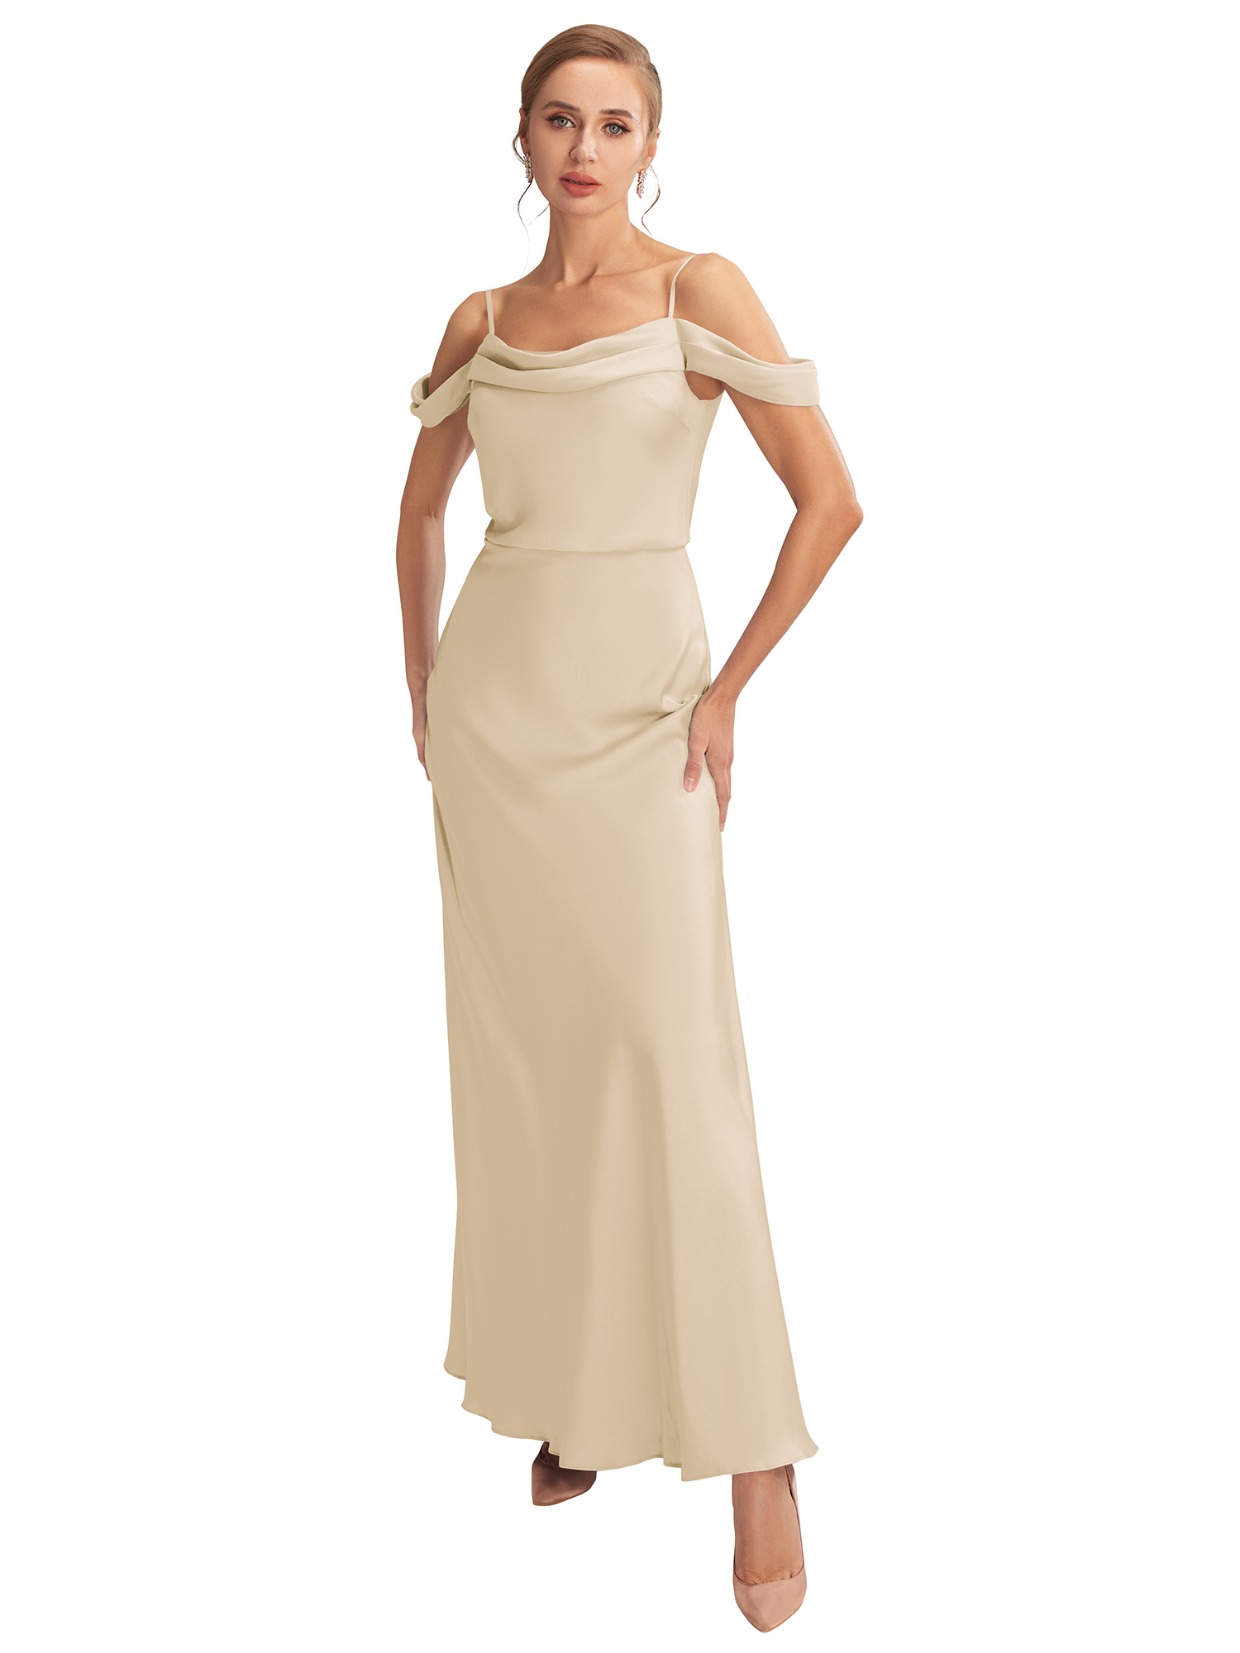 off the shoulder champagne satin bridesmaid dress by AW Bridal